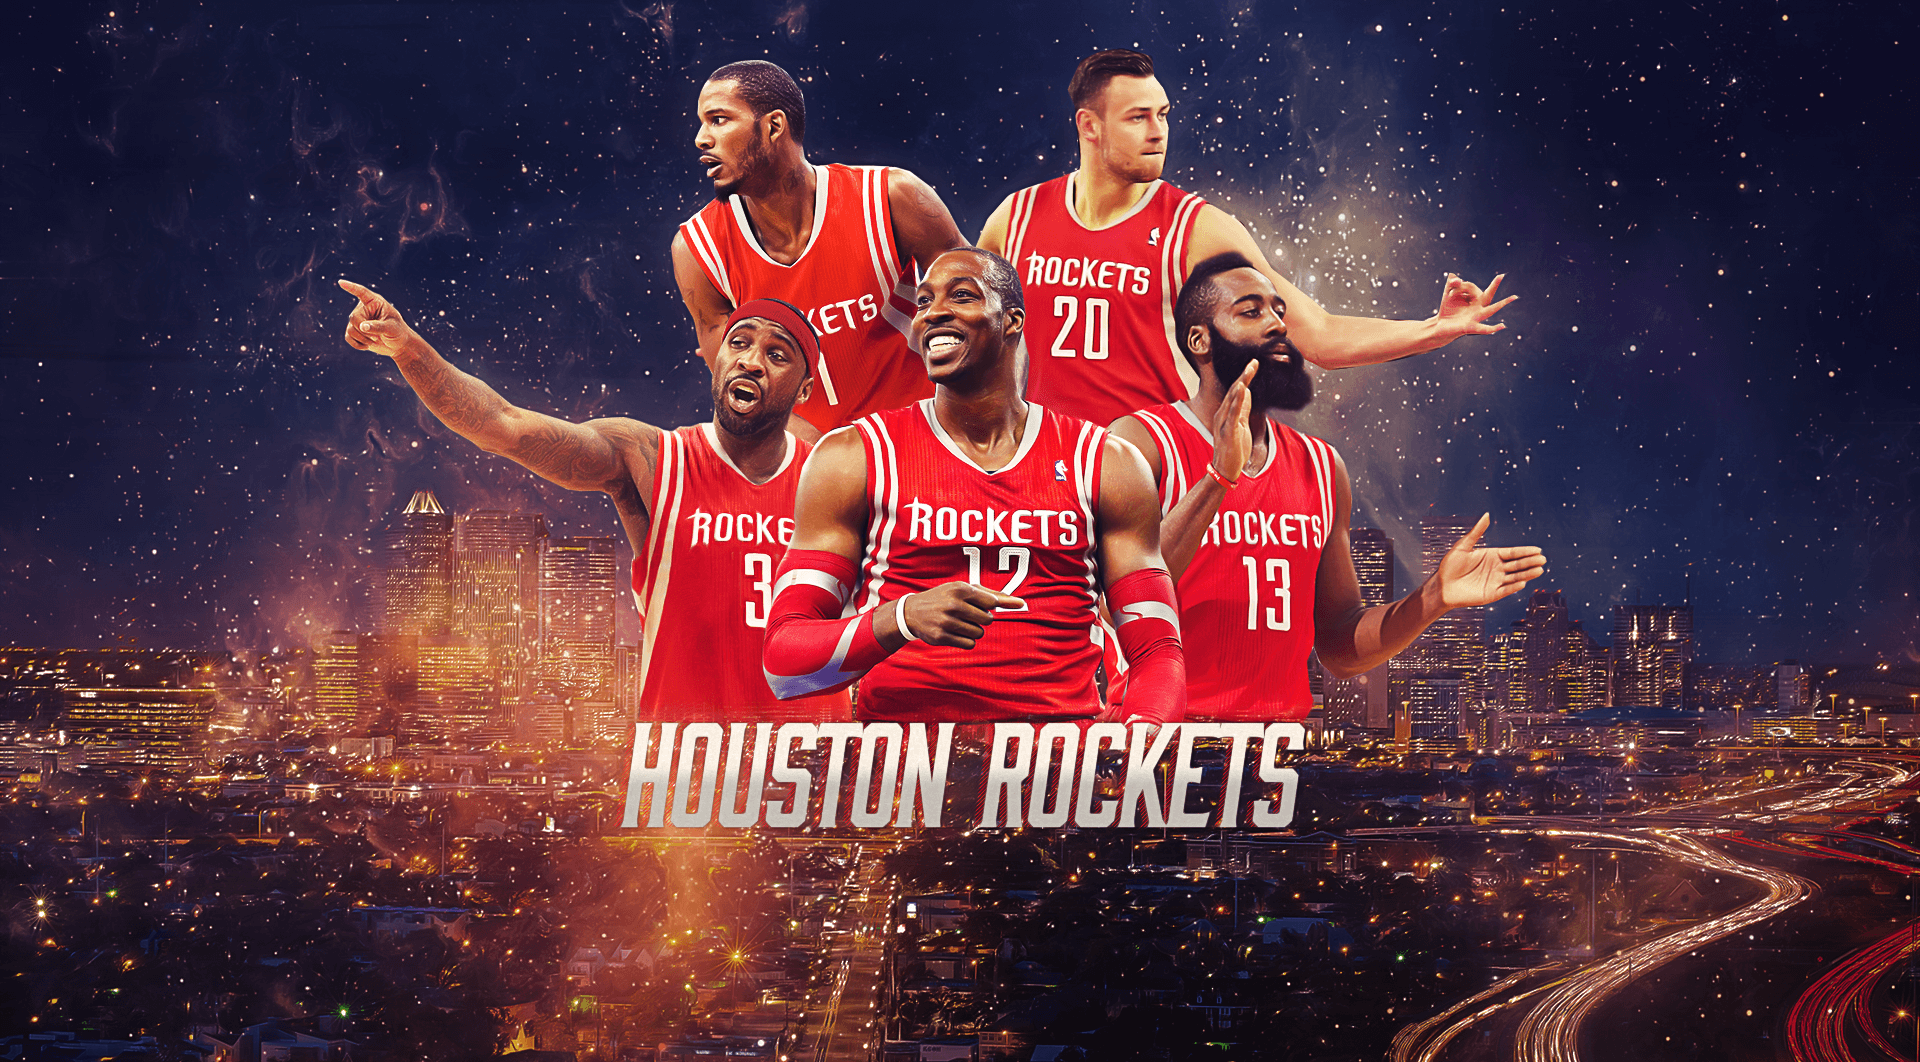 Houston Rockets 2017 Wallpapers Wallpaper Cave